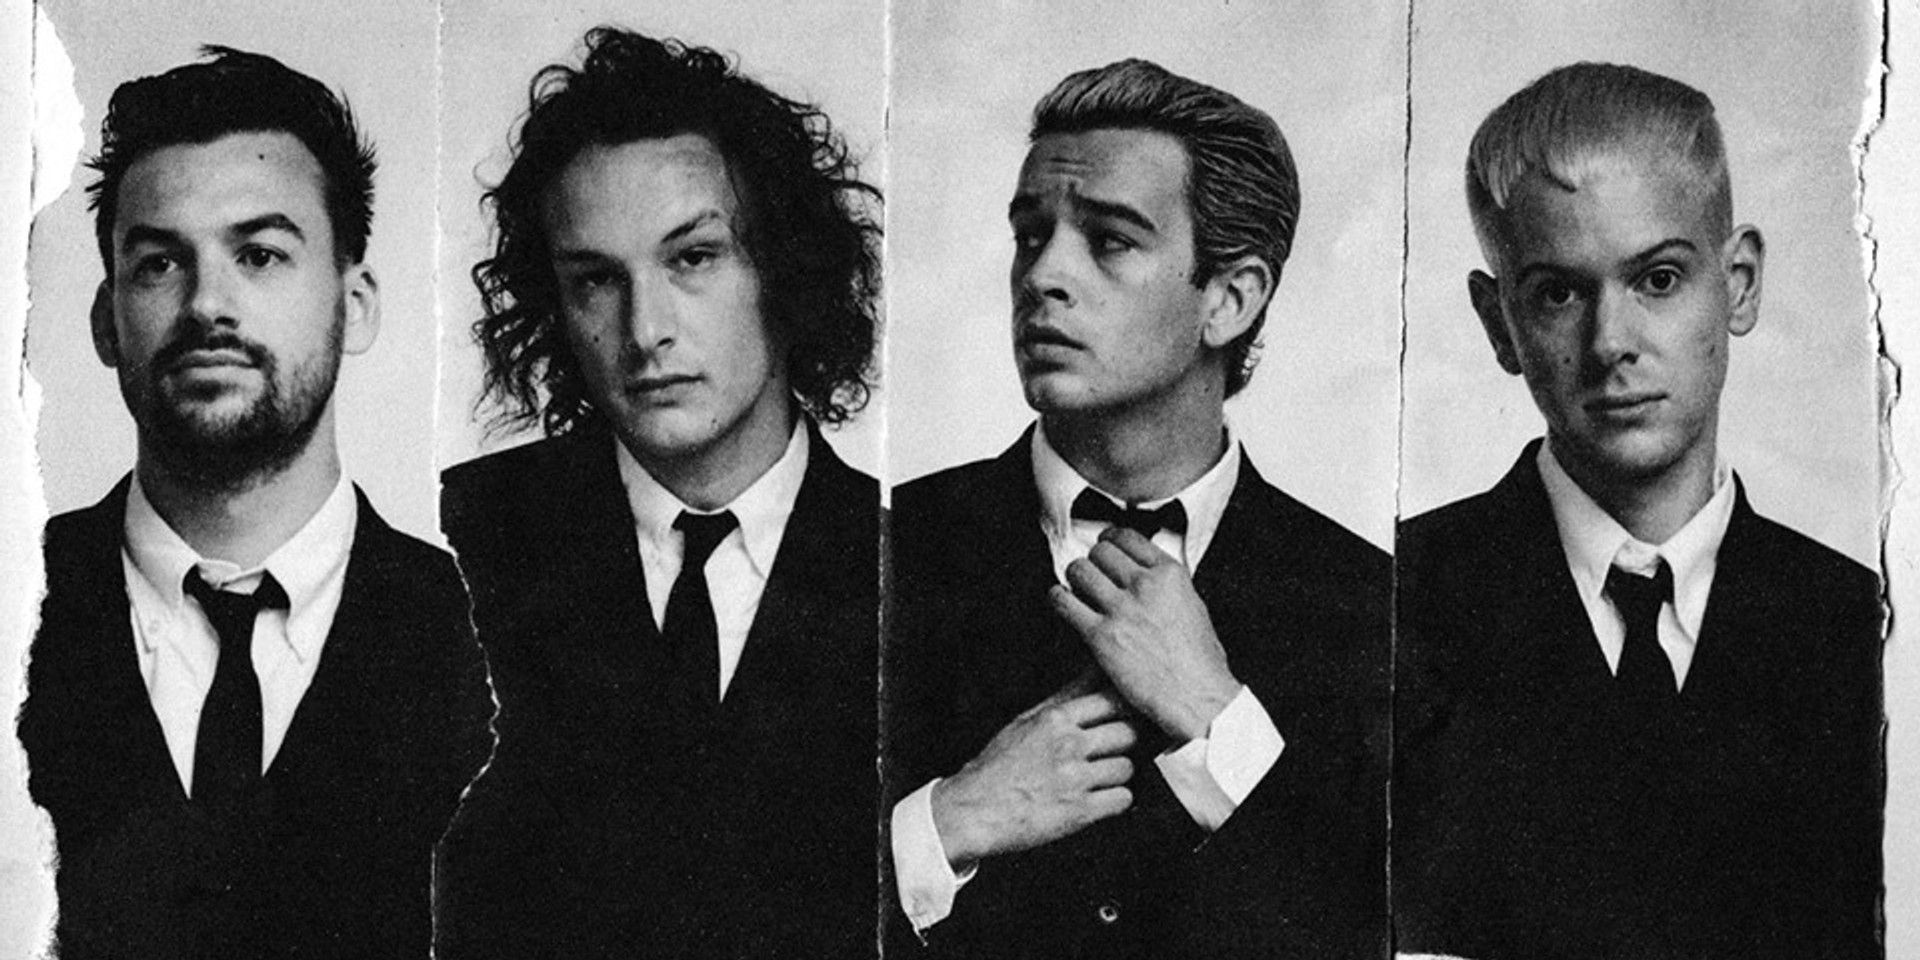 The 1975 will play in Singapore in September 2019